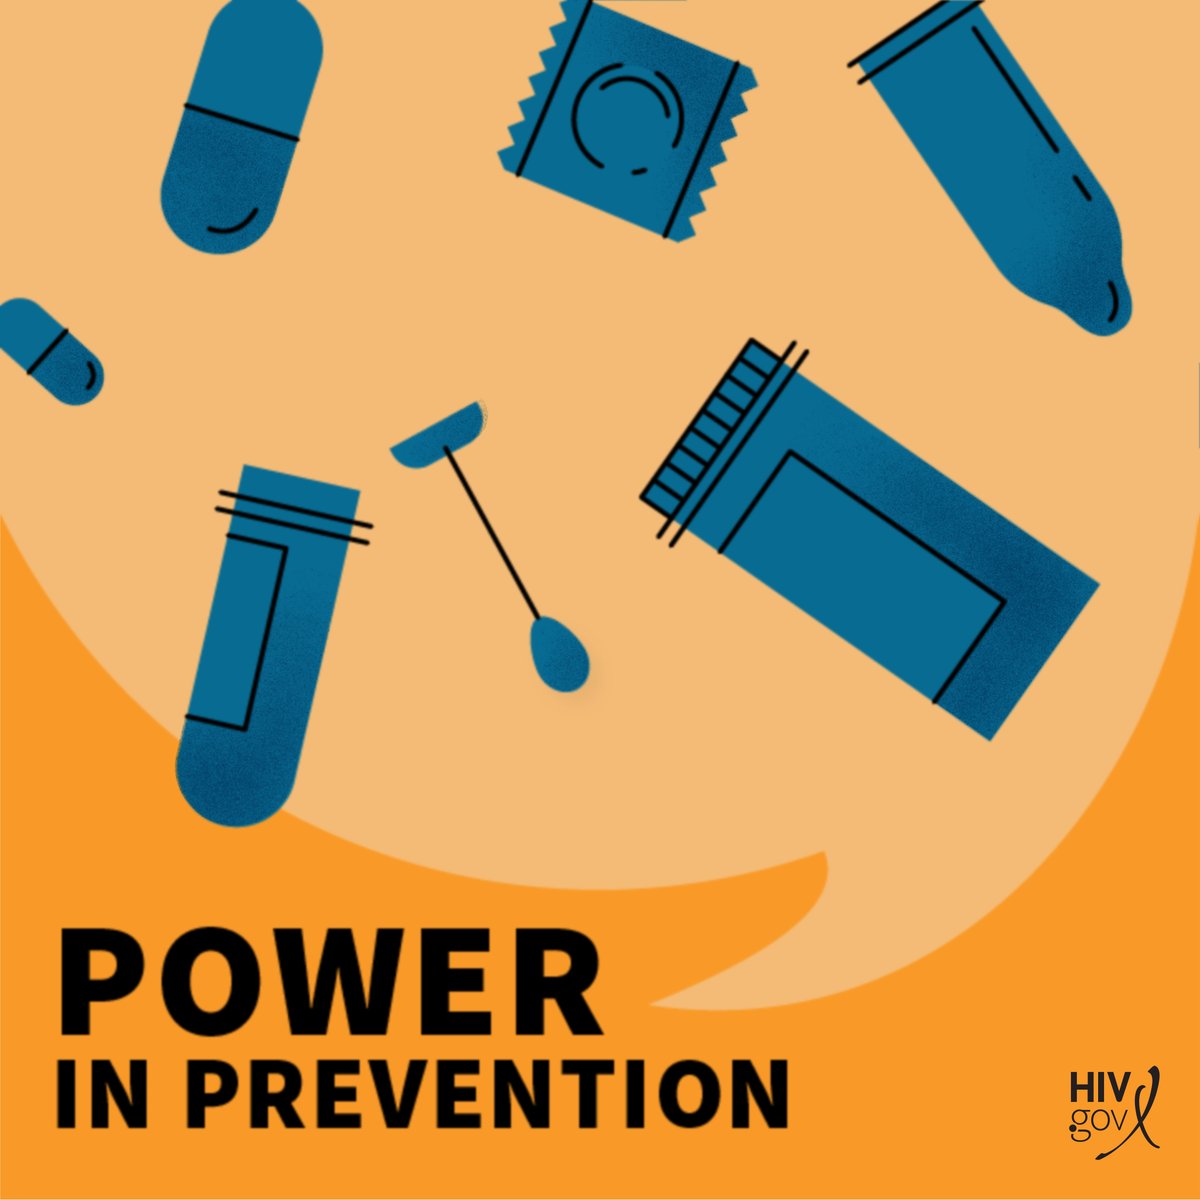 There are several options for #HIV prevention, including taking PrEP and using condoms the right way every time you have sex. 👉 Check out what options work best for you: ms.spr.ly/6019Z0Ncc

#ReadySetPrEP